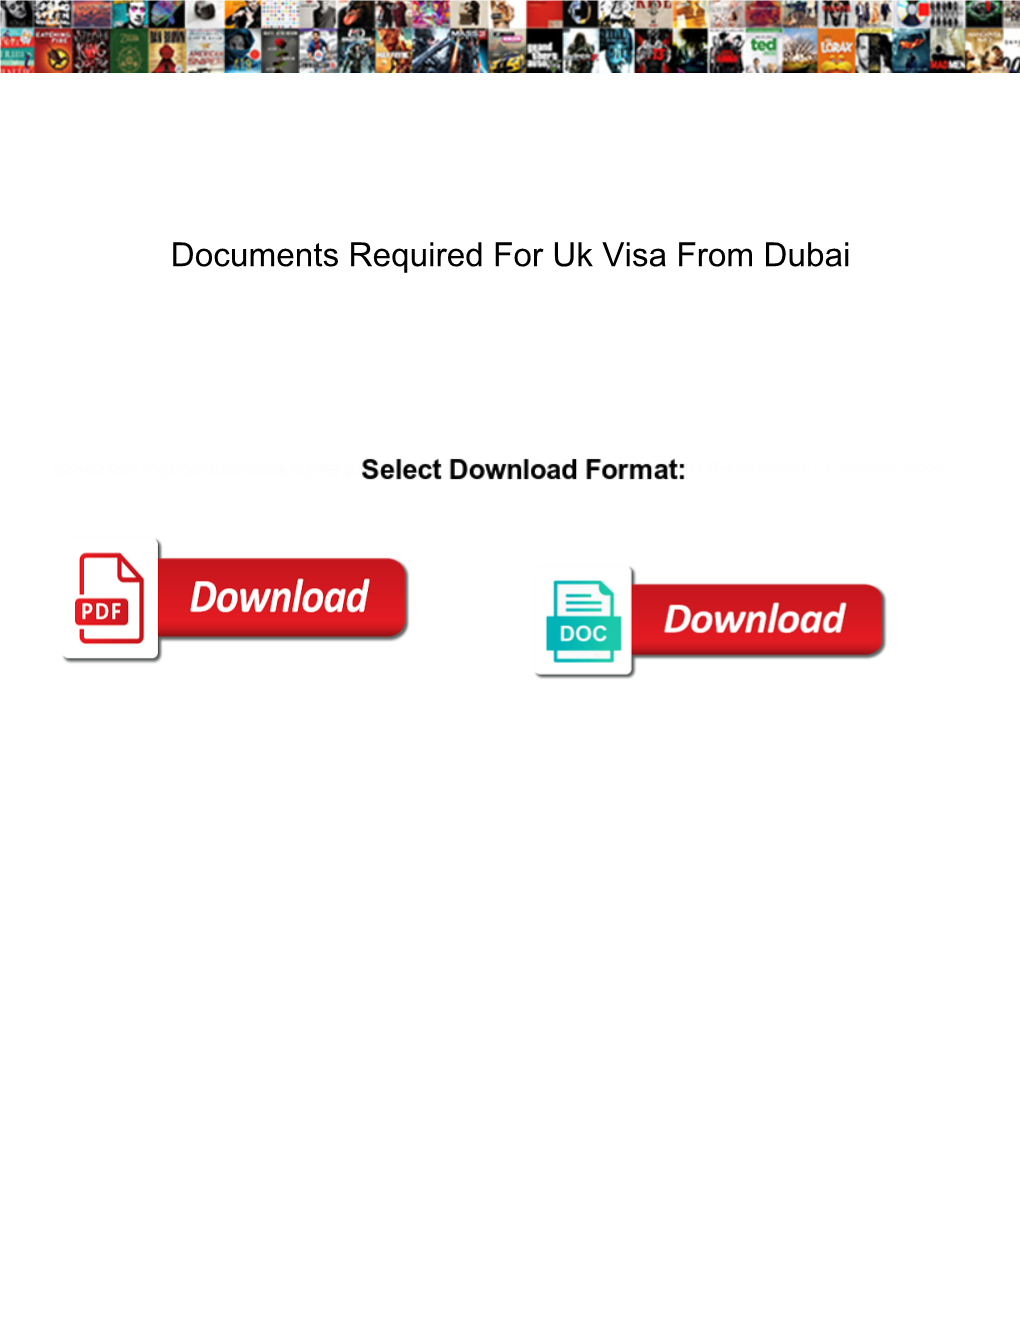 Documents Required for Uk Visa from Dubai